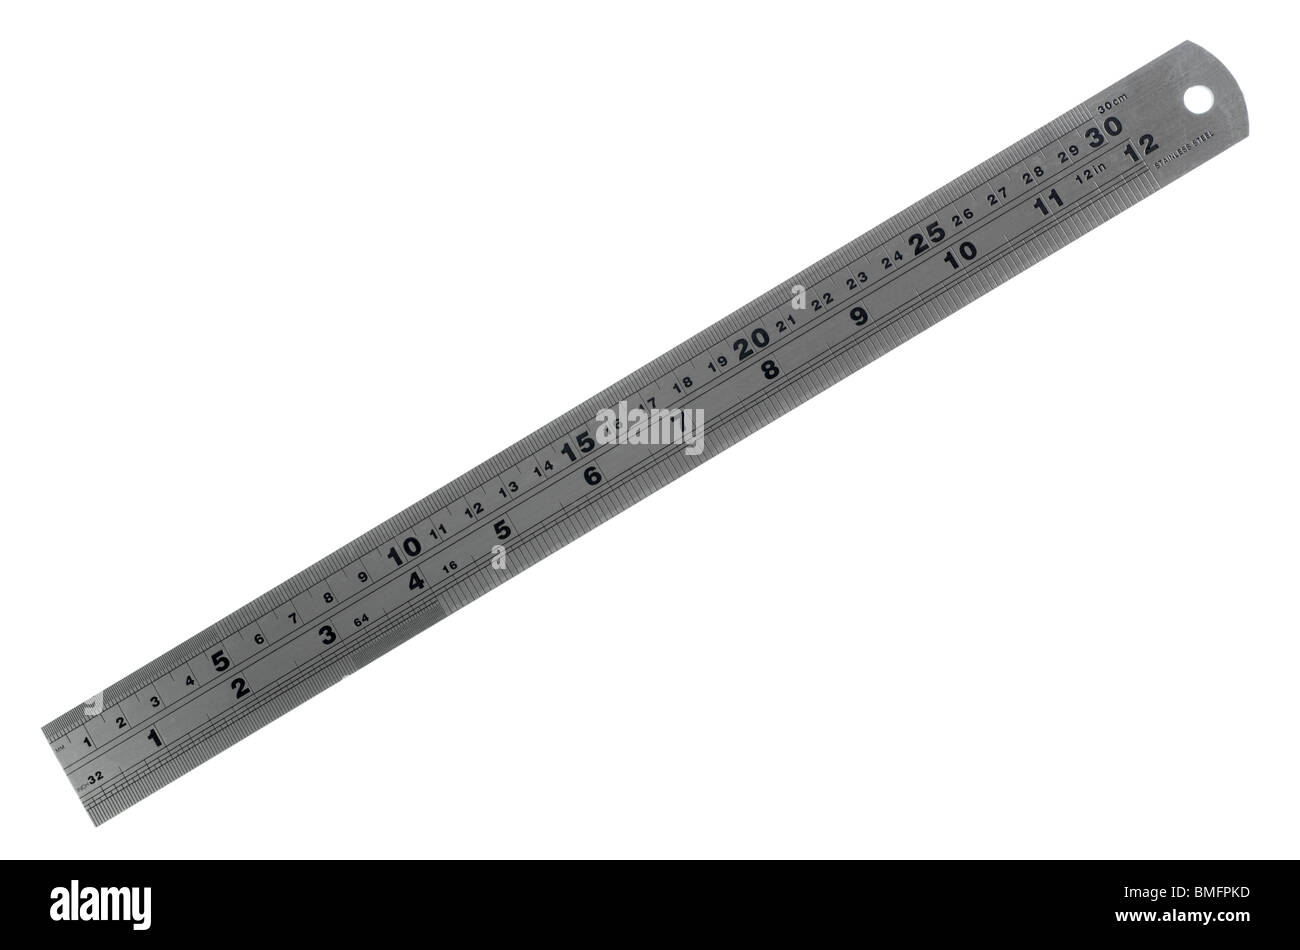 4 X STAINLESS STEEL RULER 20 CM Long 8 " METRIC & IMPERIAL OTHER SIDE FREE POST